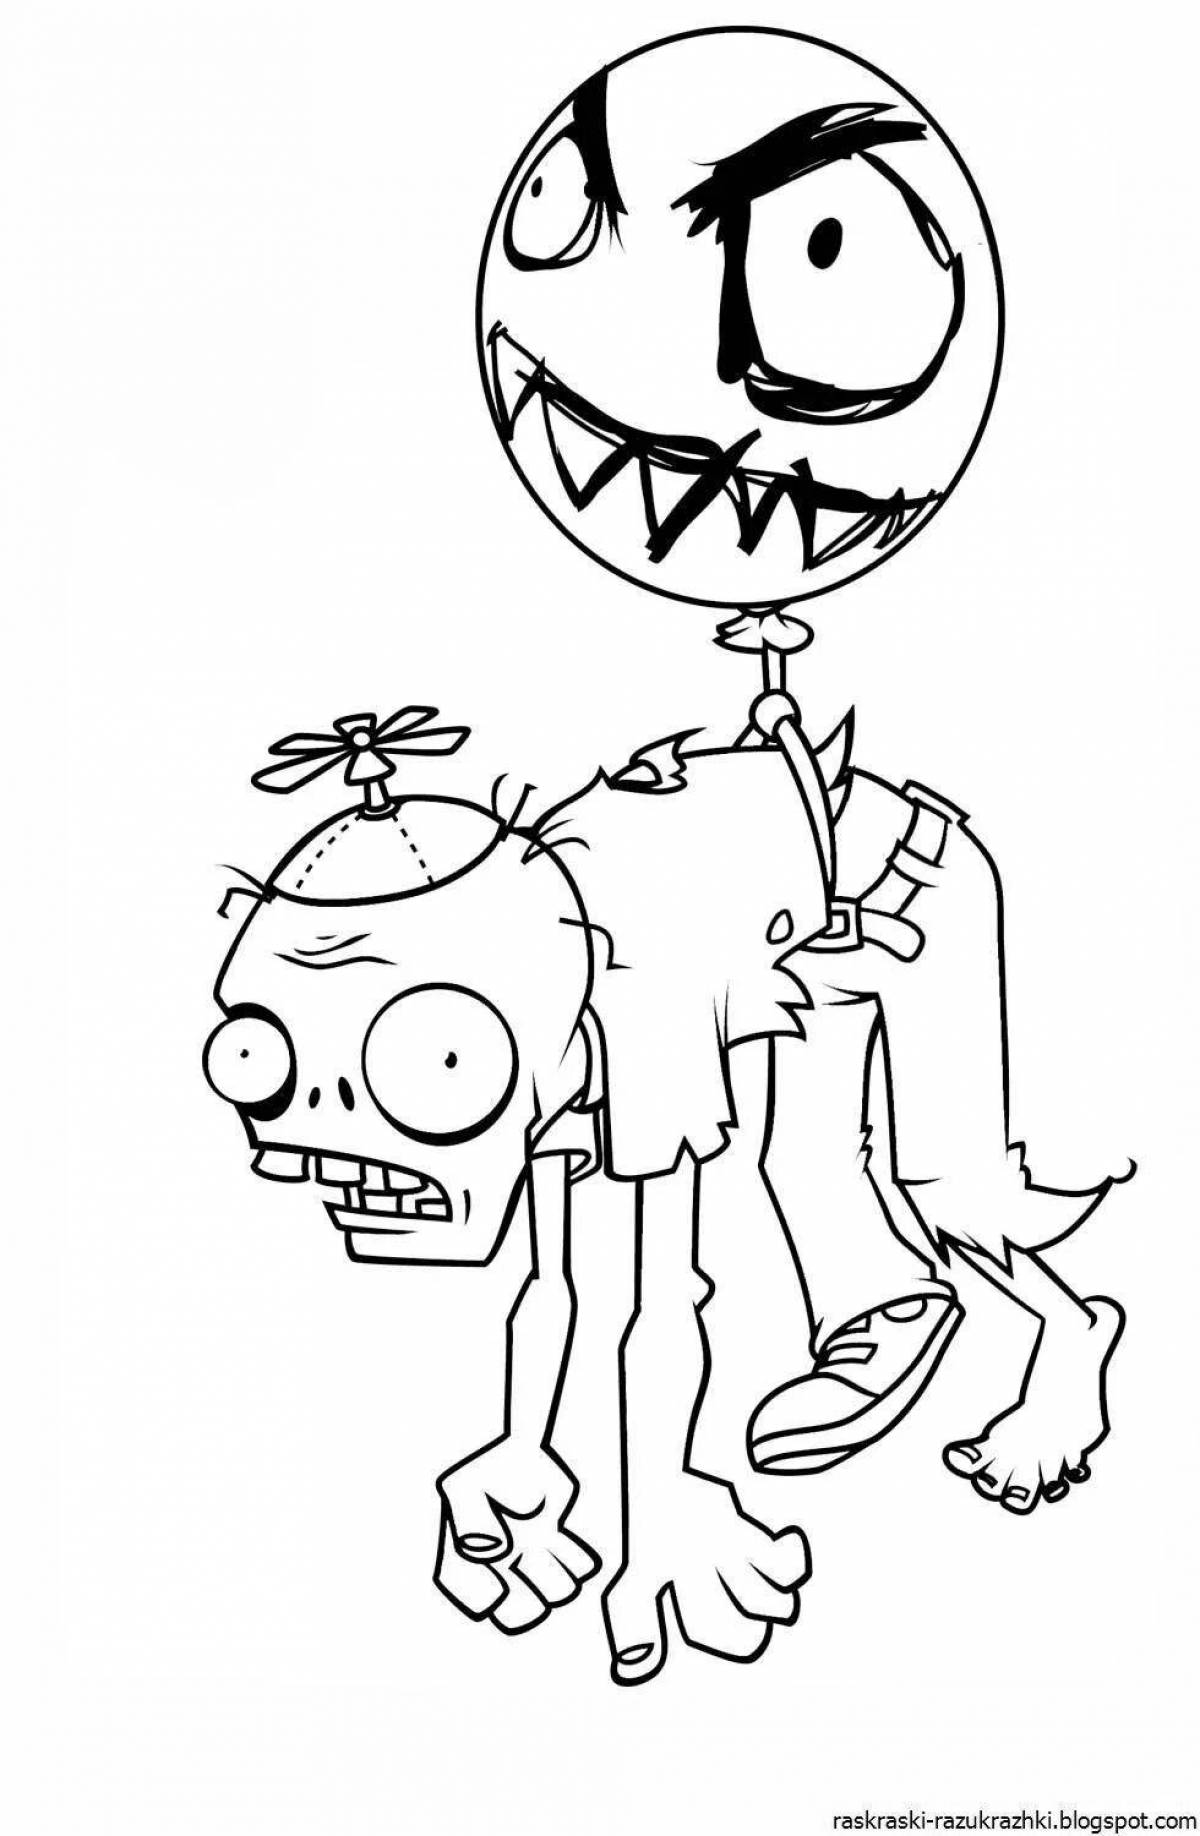 Coloring book shocking zombie sketchers